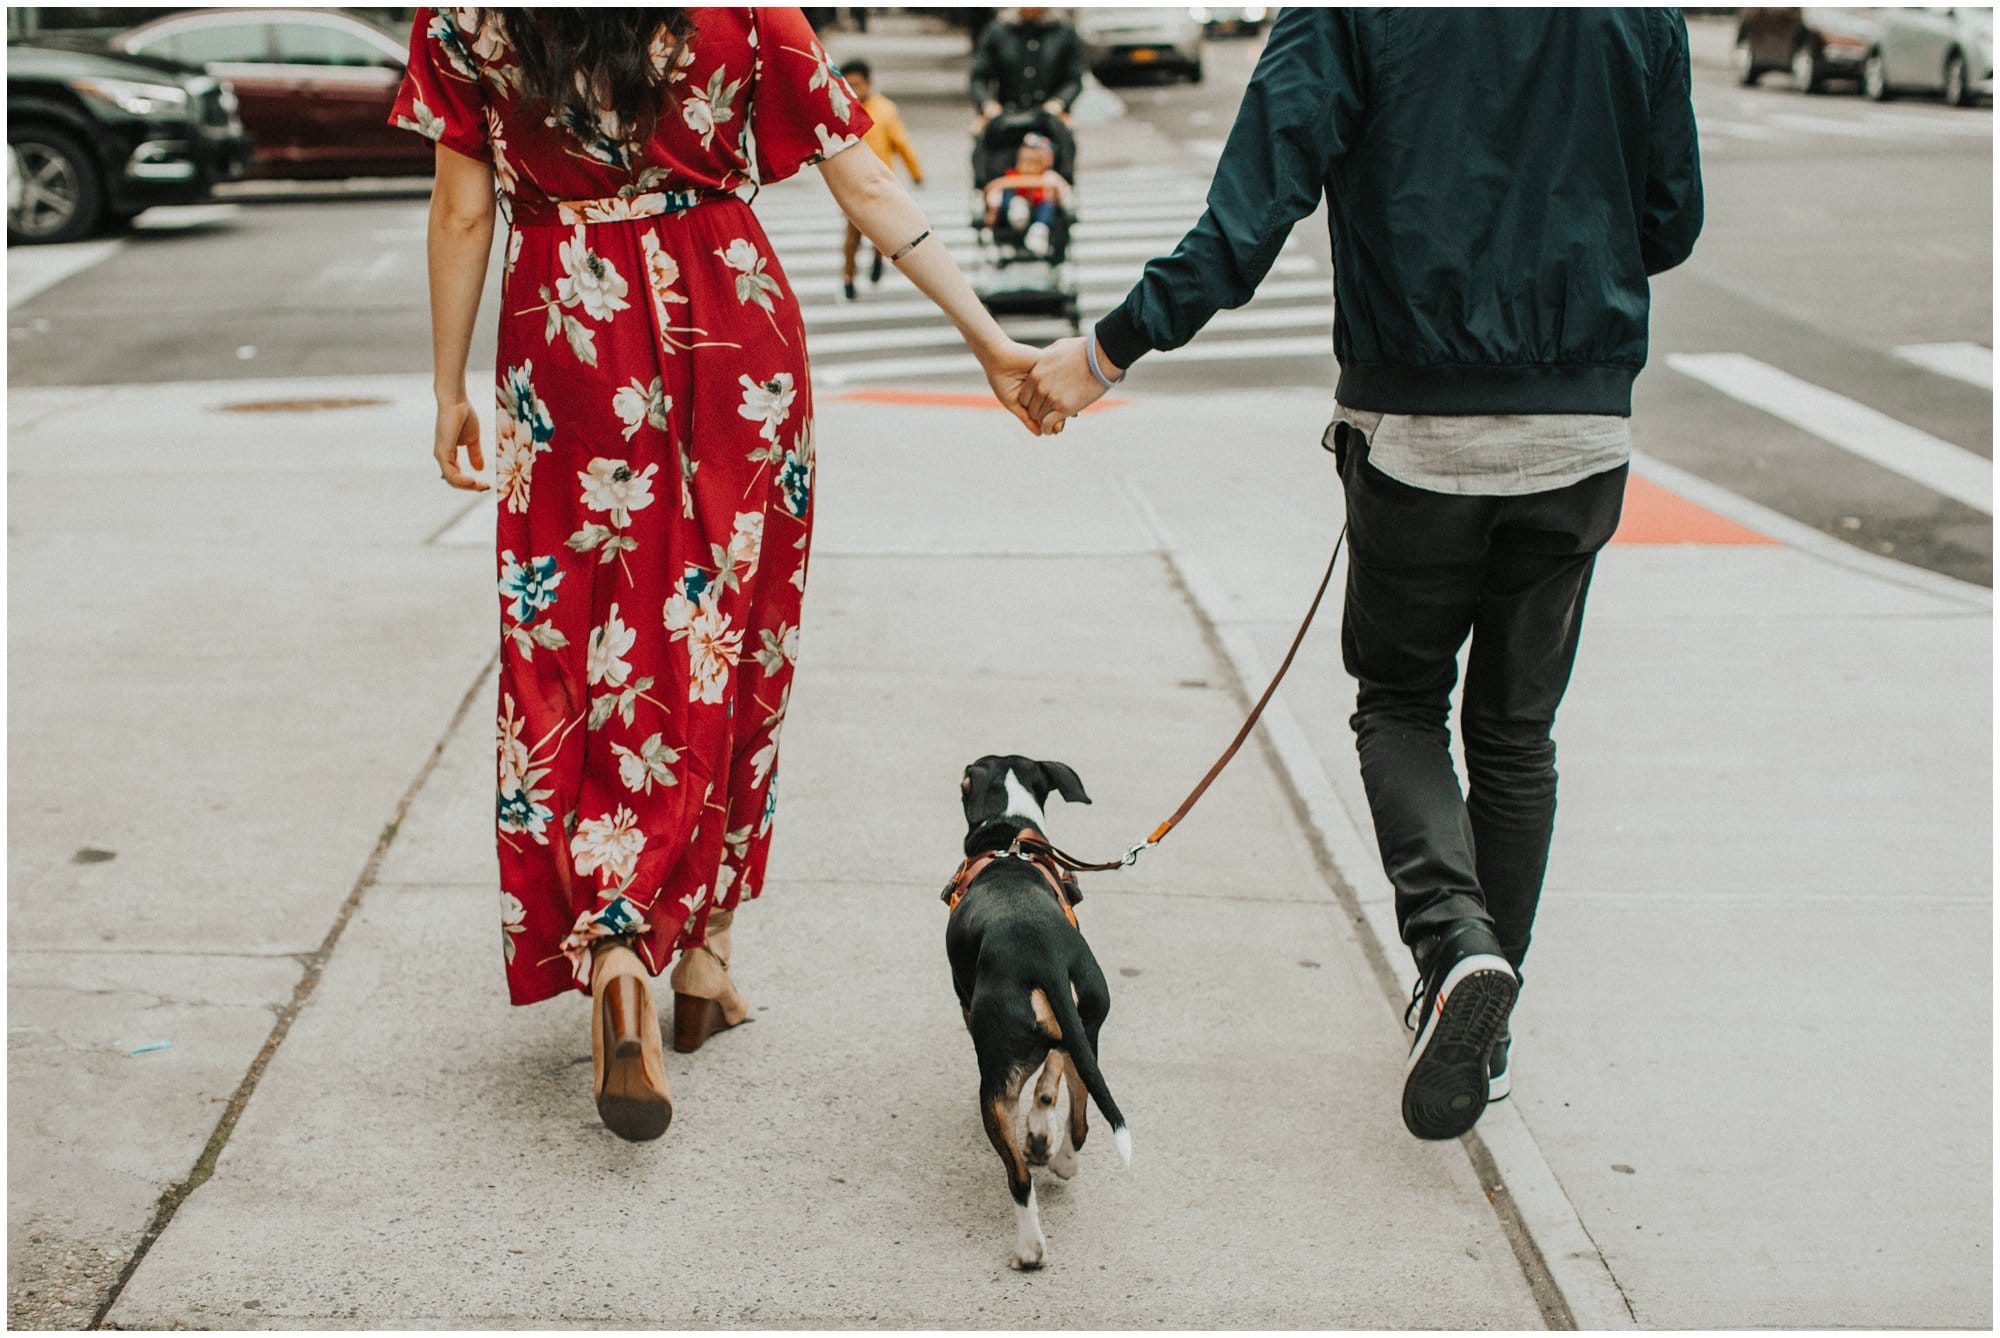 brownstone engagement photo in brooklyn new york with puppy